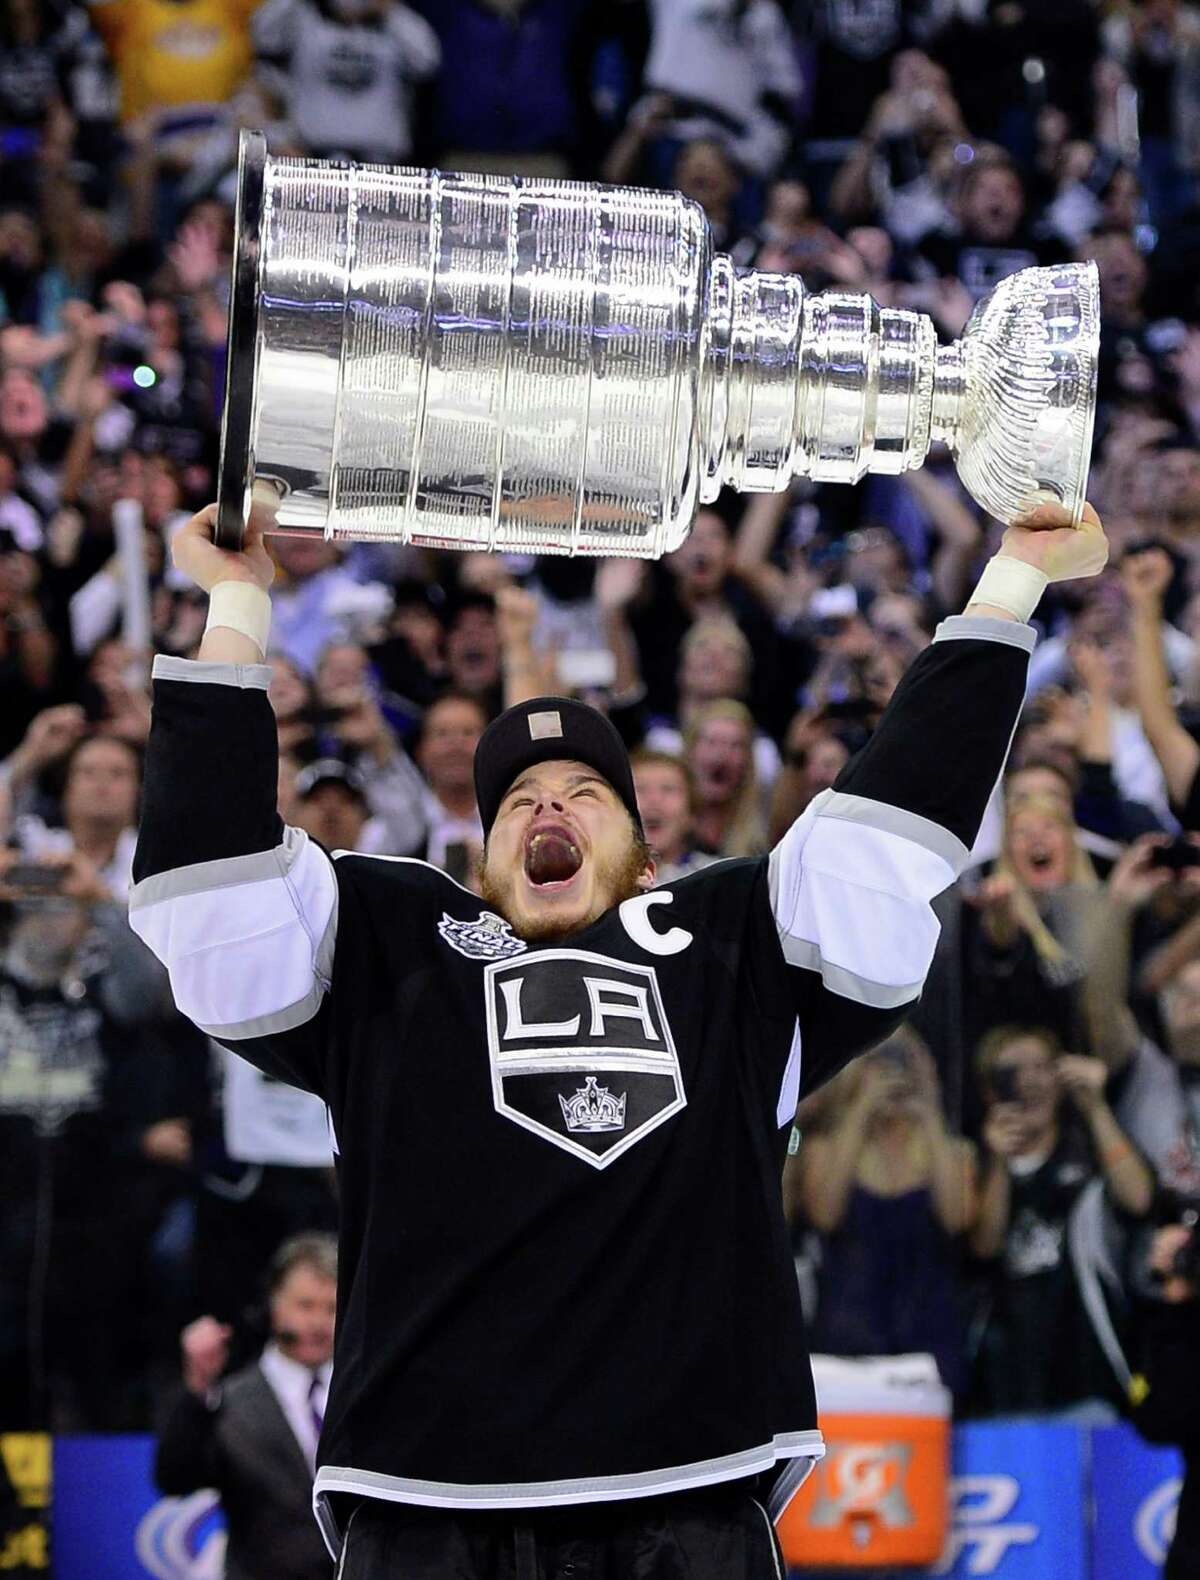 Kings 6, Devils 1 American star and Los Angeles Kings captain Dustin Brown is the first to get the Cup.(AP Photo/Mark J. Terrill)